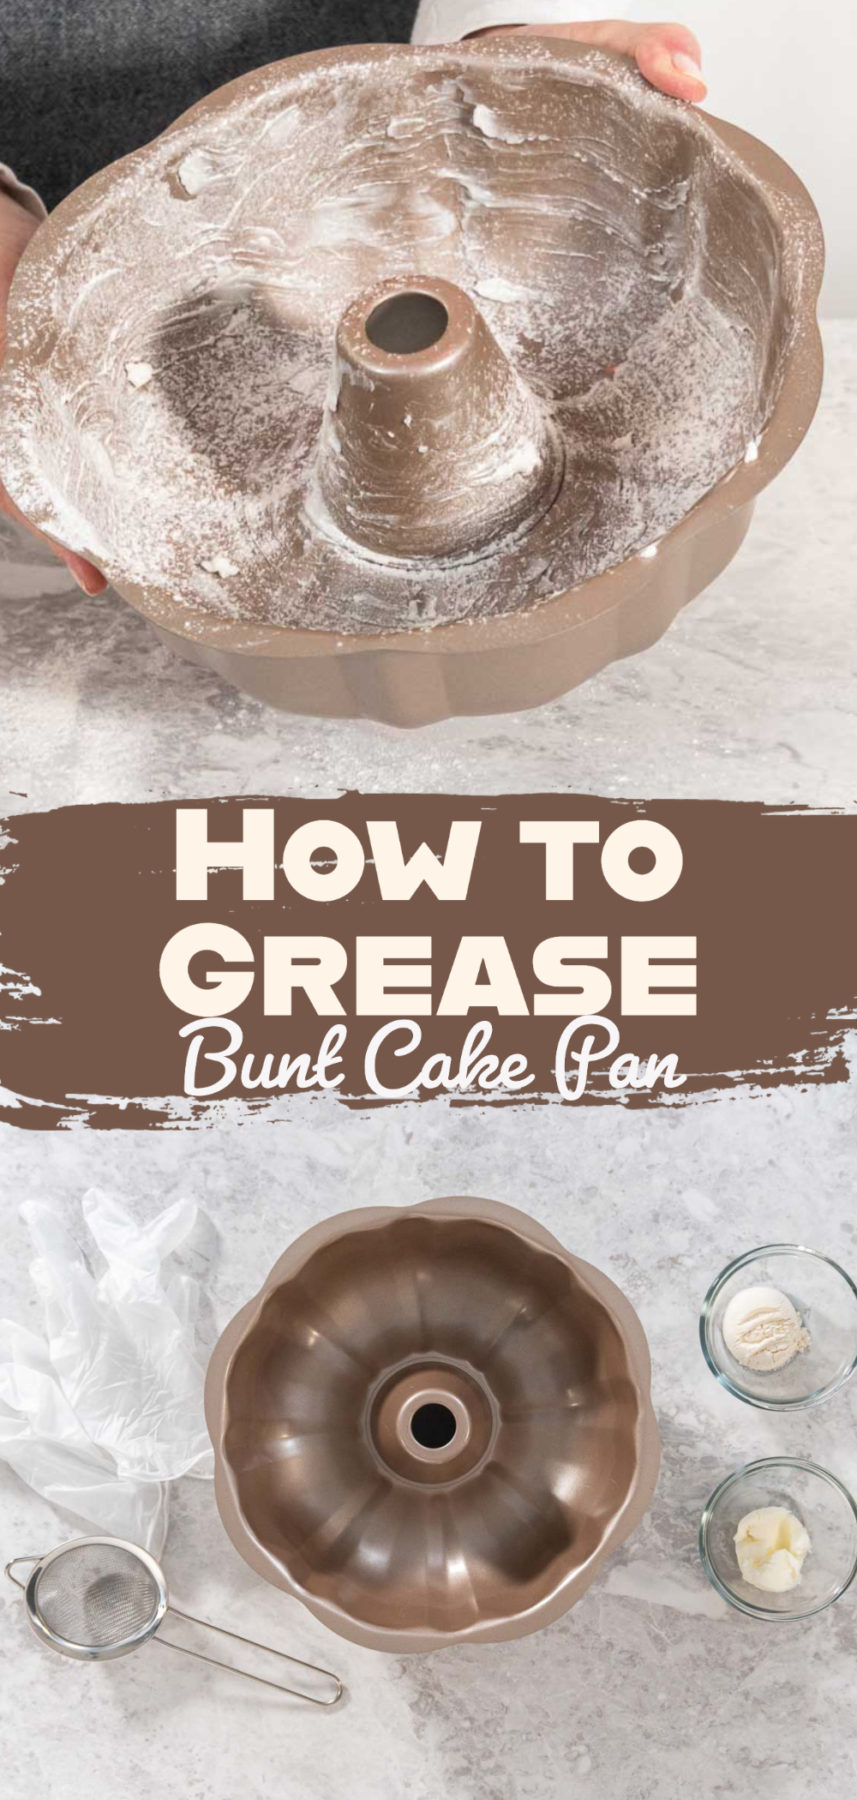 How to Grease Bundt Cake Pan